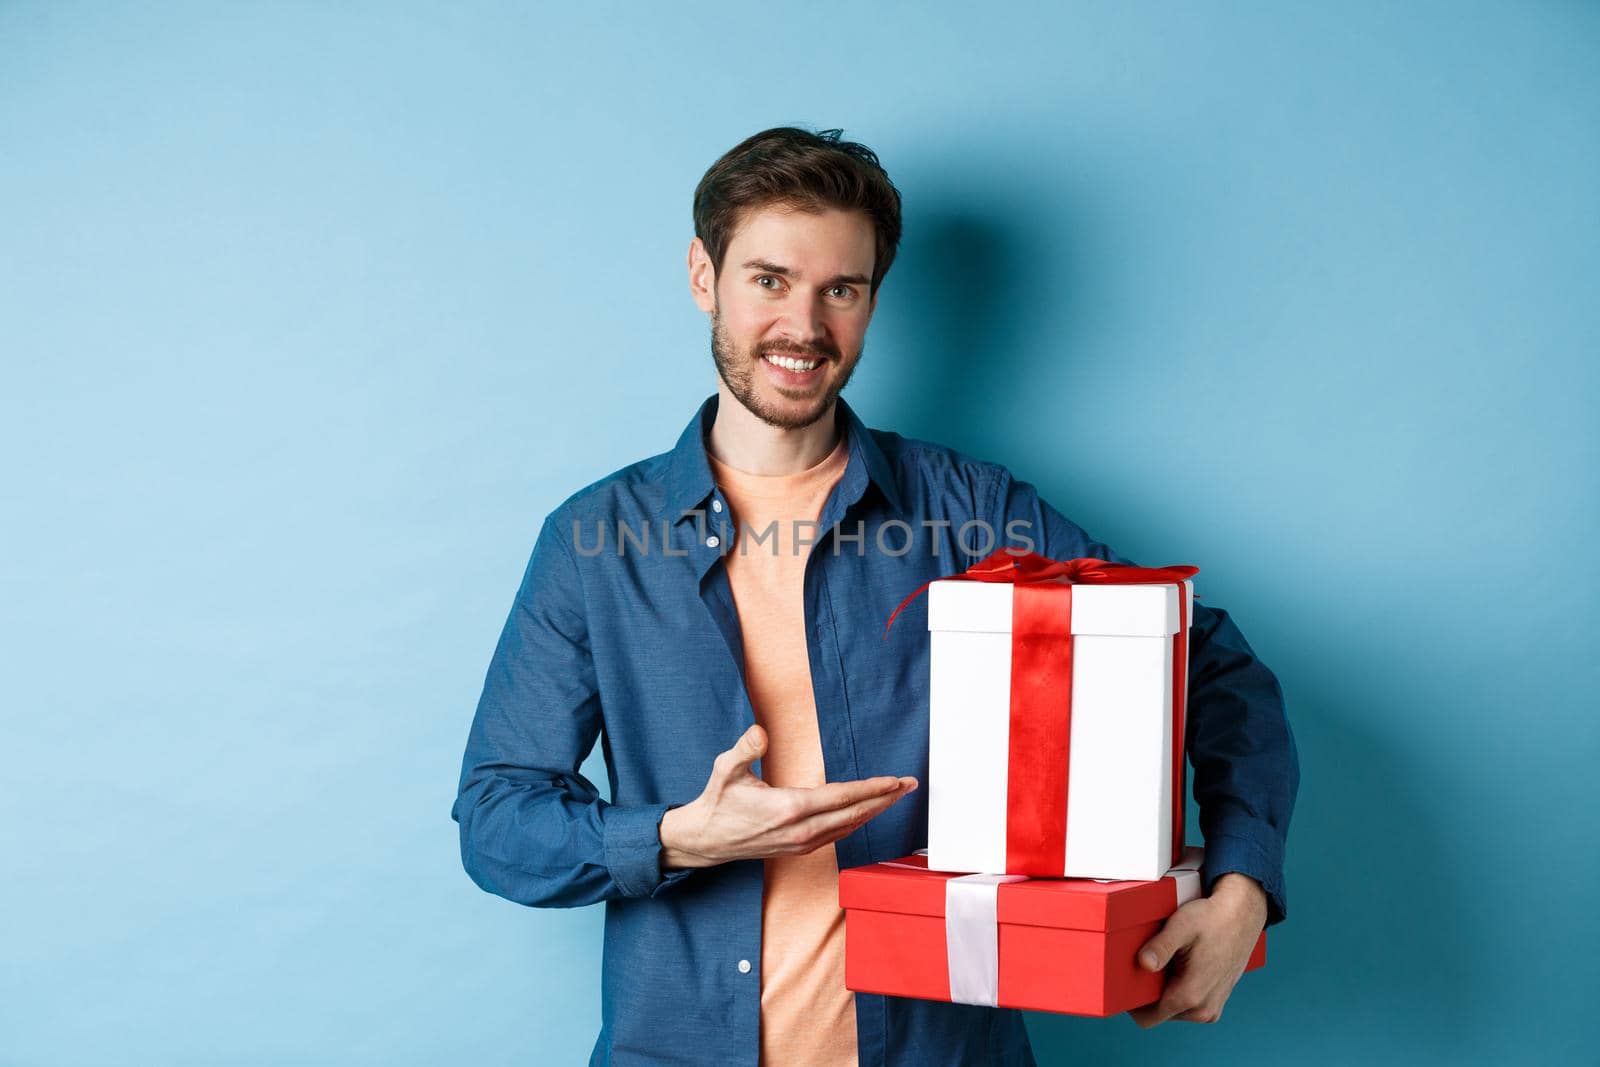 Young man in casual clothes buying romantic gifts on Valentines day, pointing at presents boxes and smiling, standing over blue background.